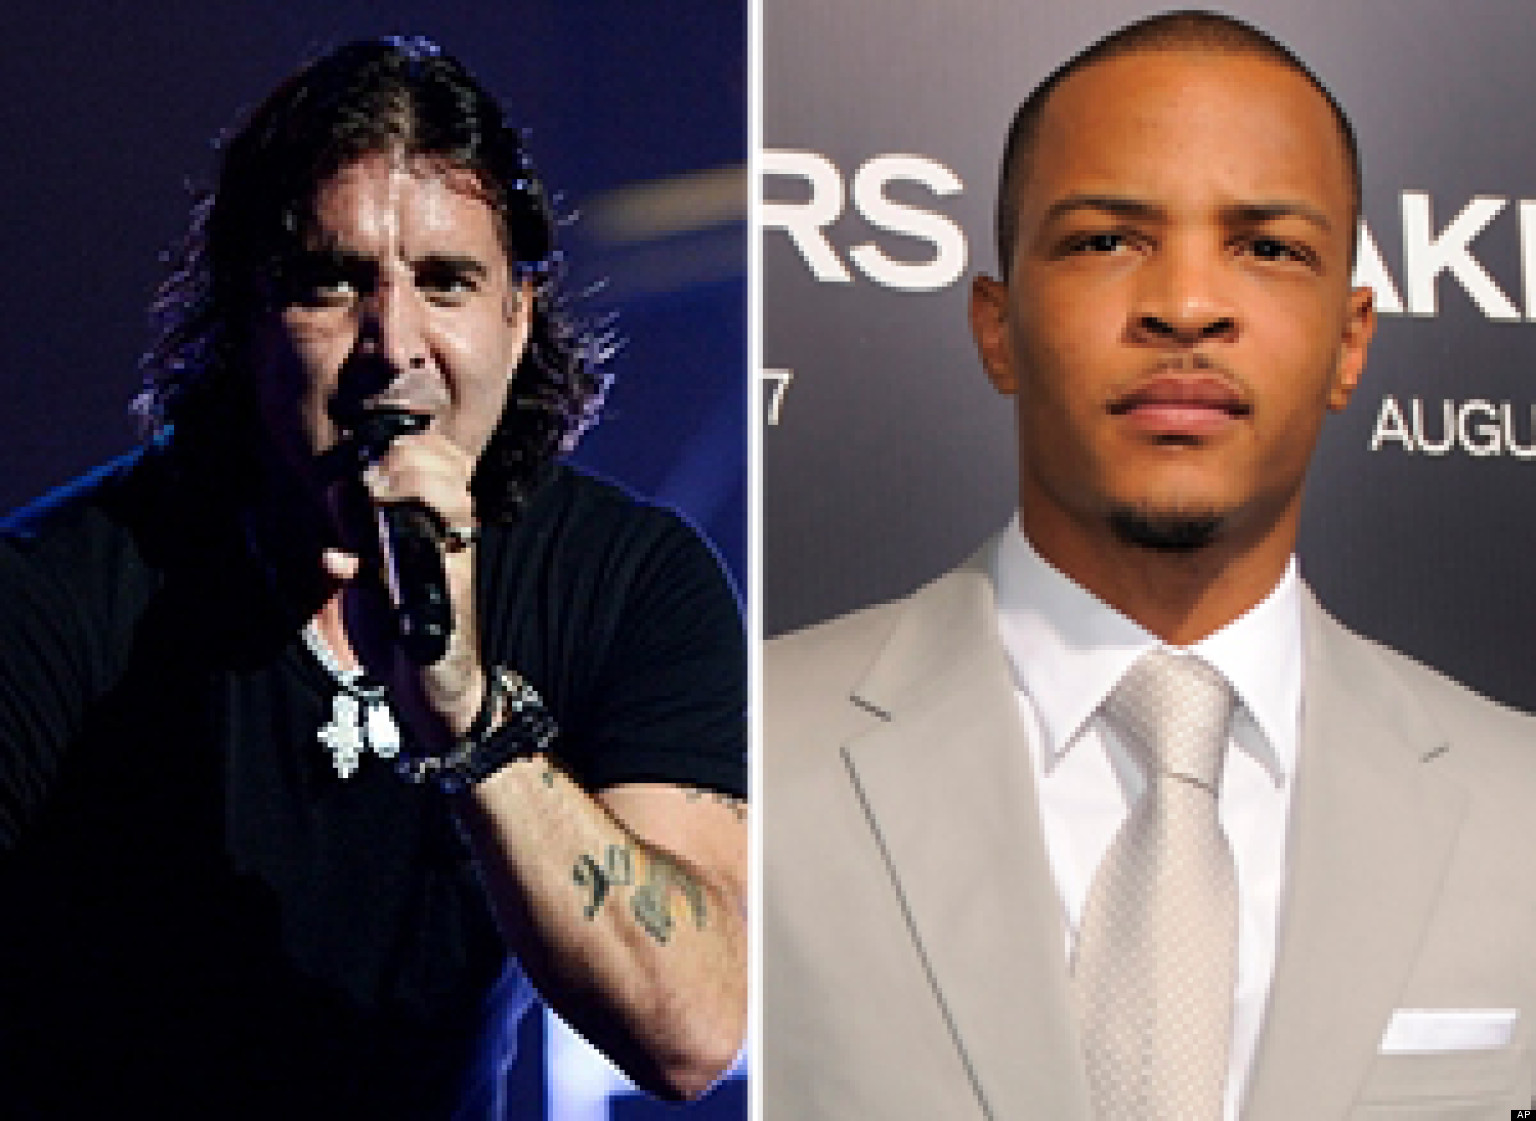 Ti And Scott Stapp Rapper Saved Creed Singers Life After Suicide Attempt Huffpost 